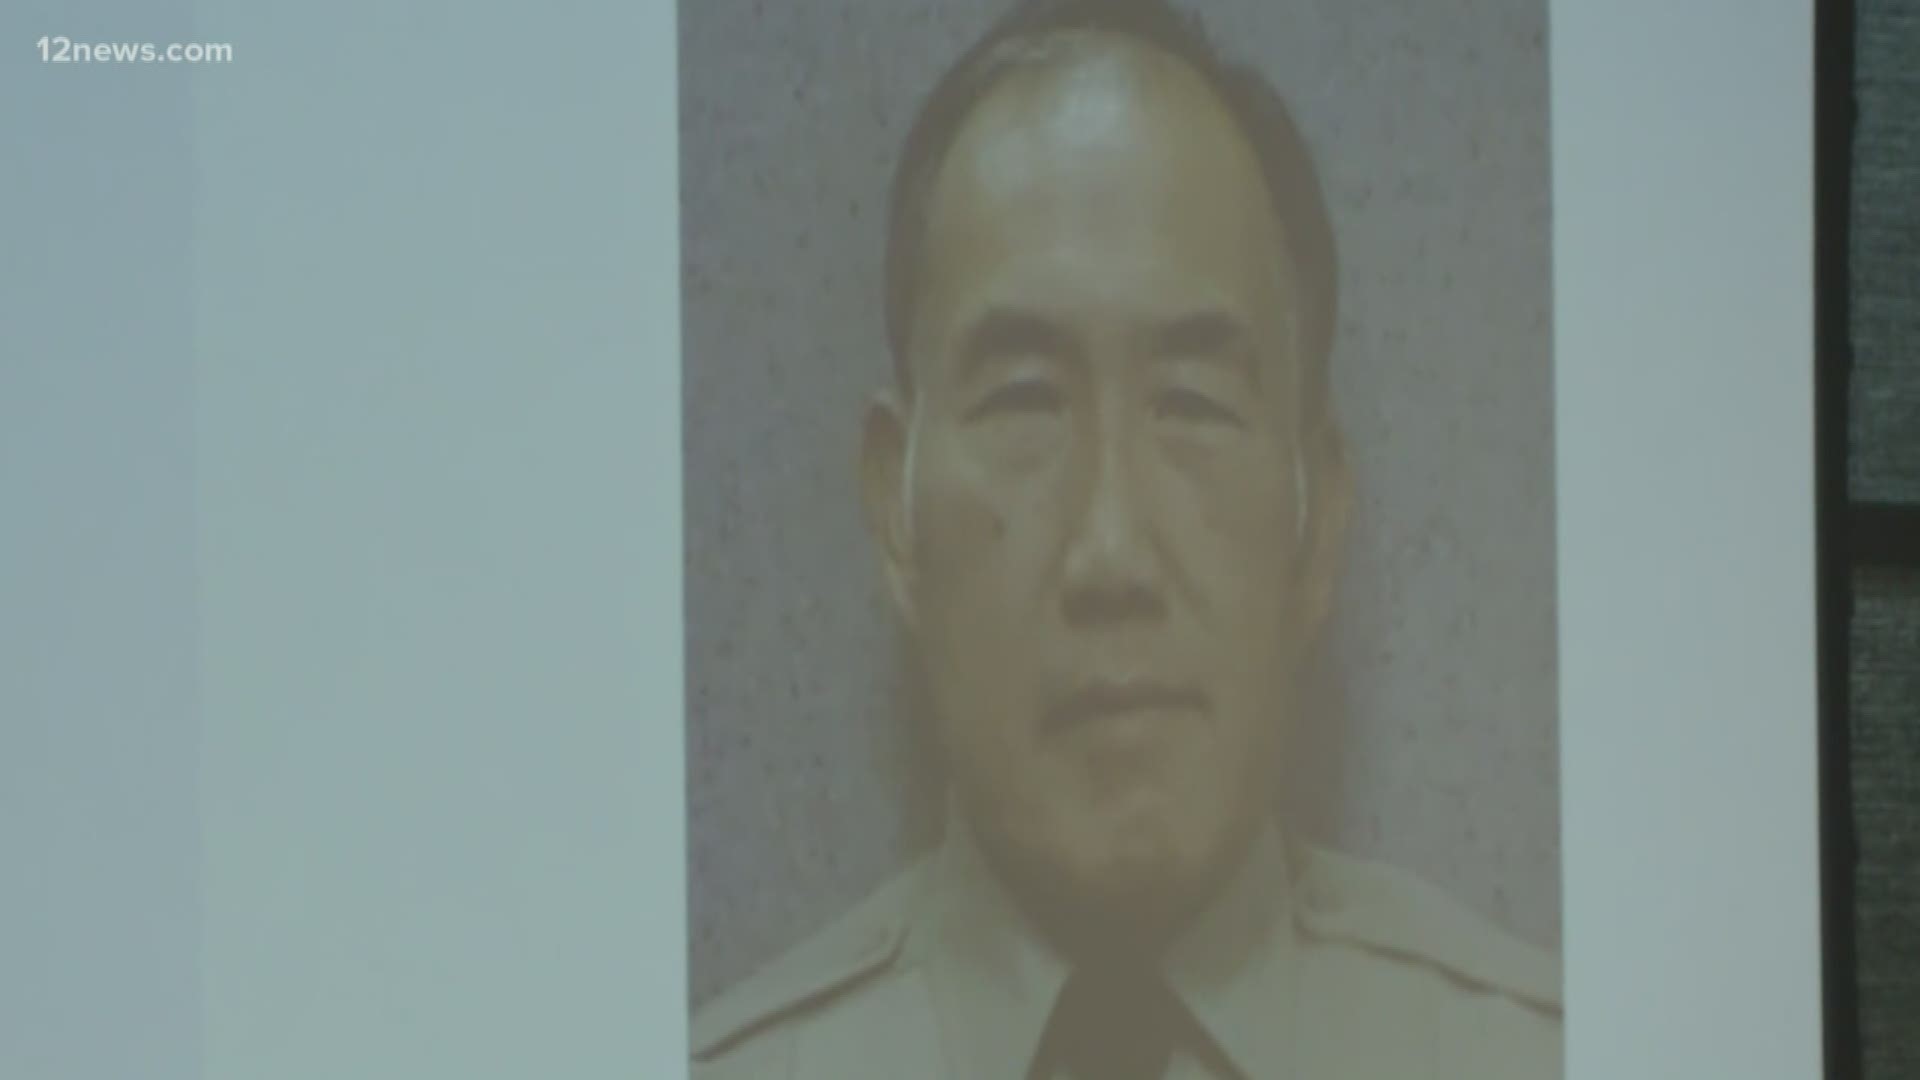 Gene Lee died after he was attacked by an inmate. His death marked the first time the Maricopa County Sheriff's Office has lost a detention officer.